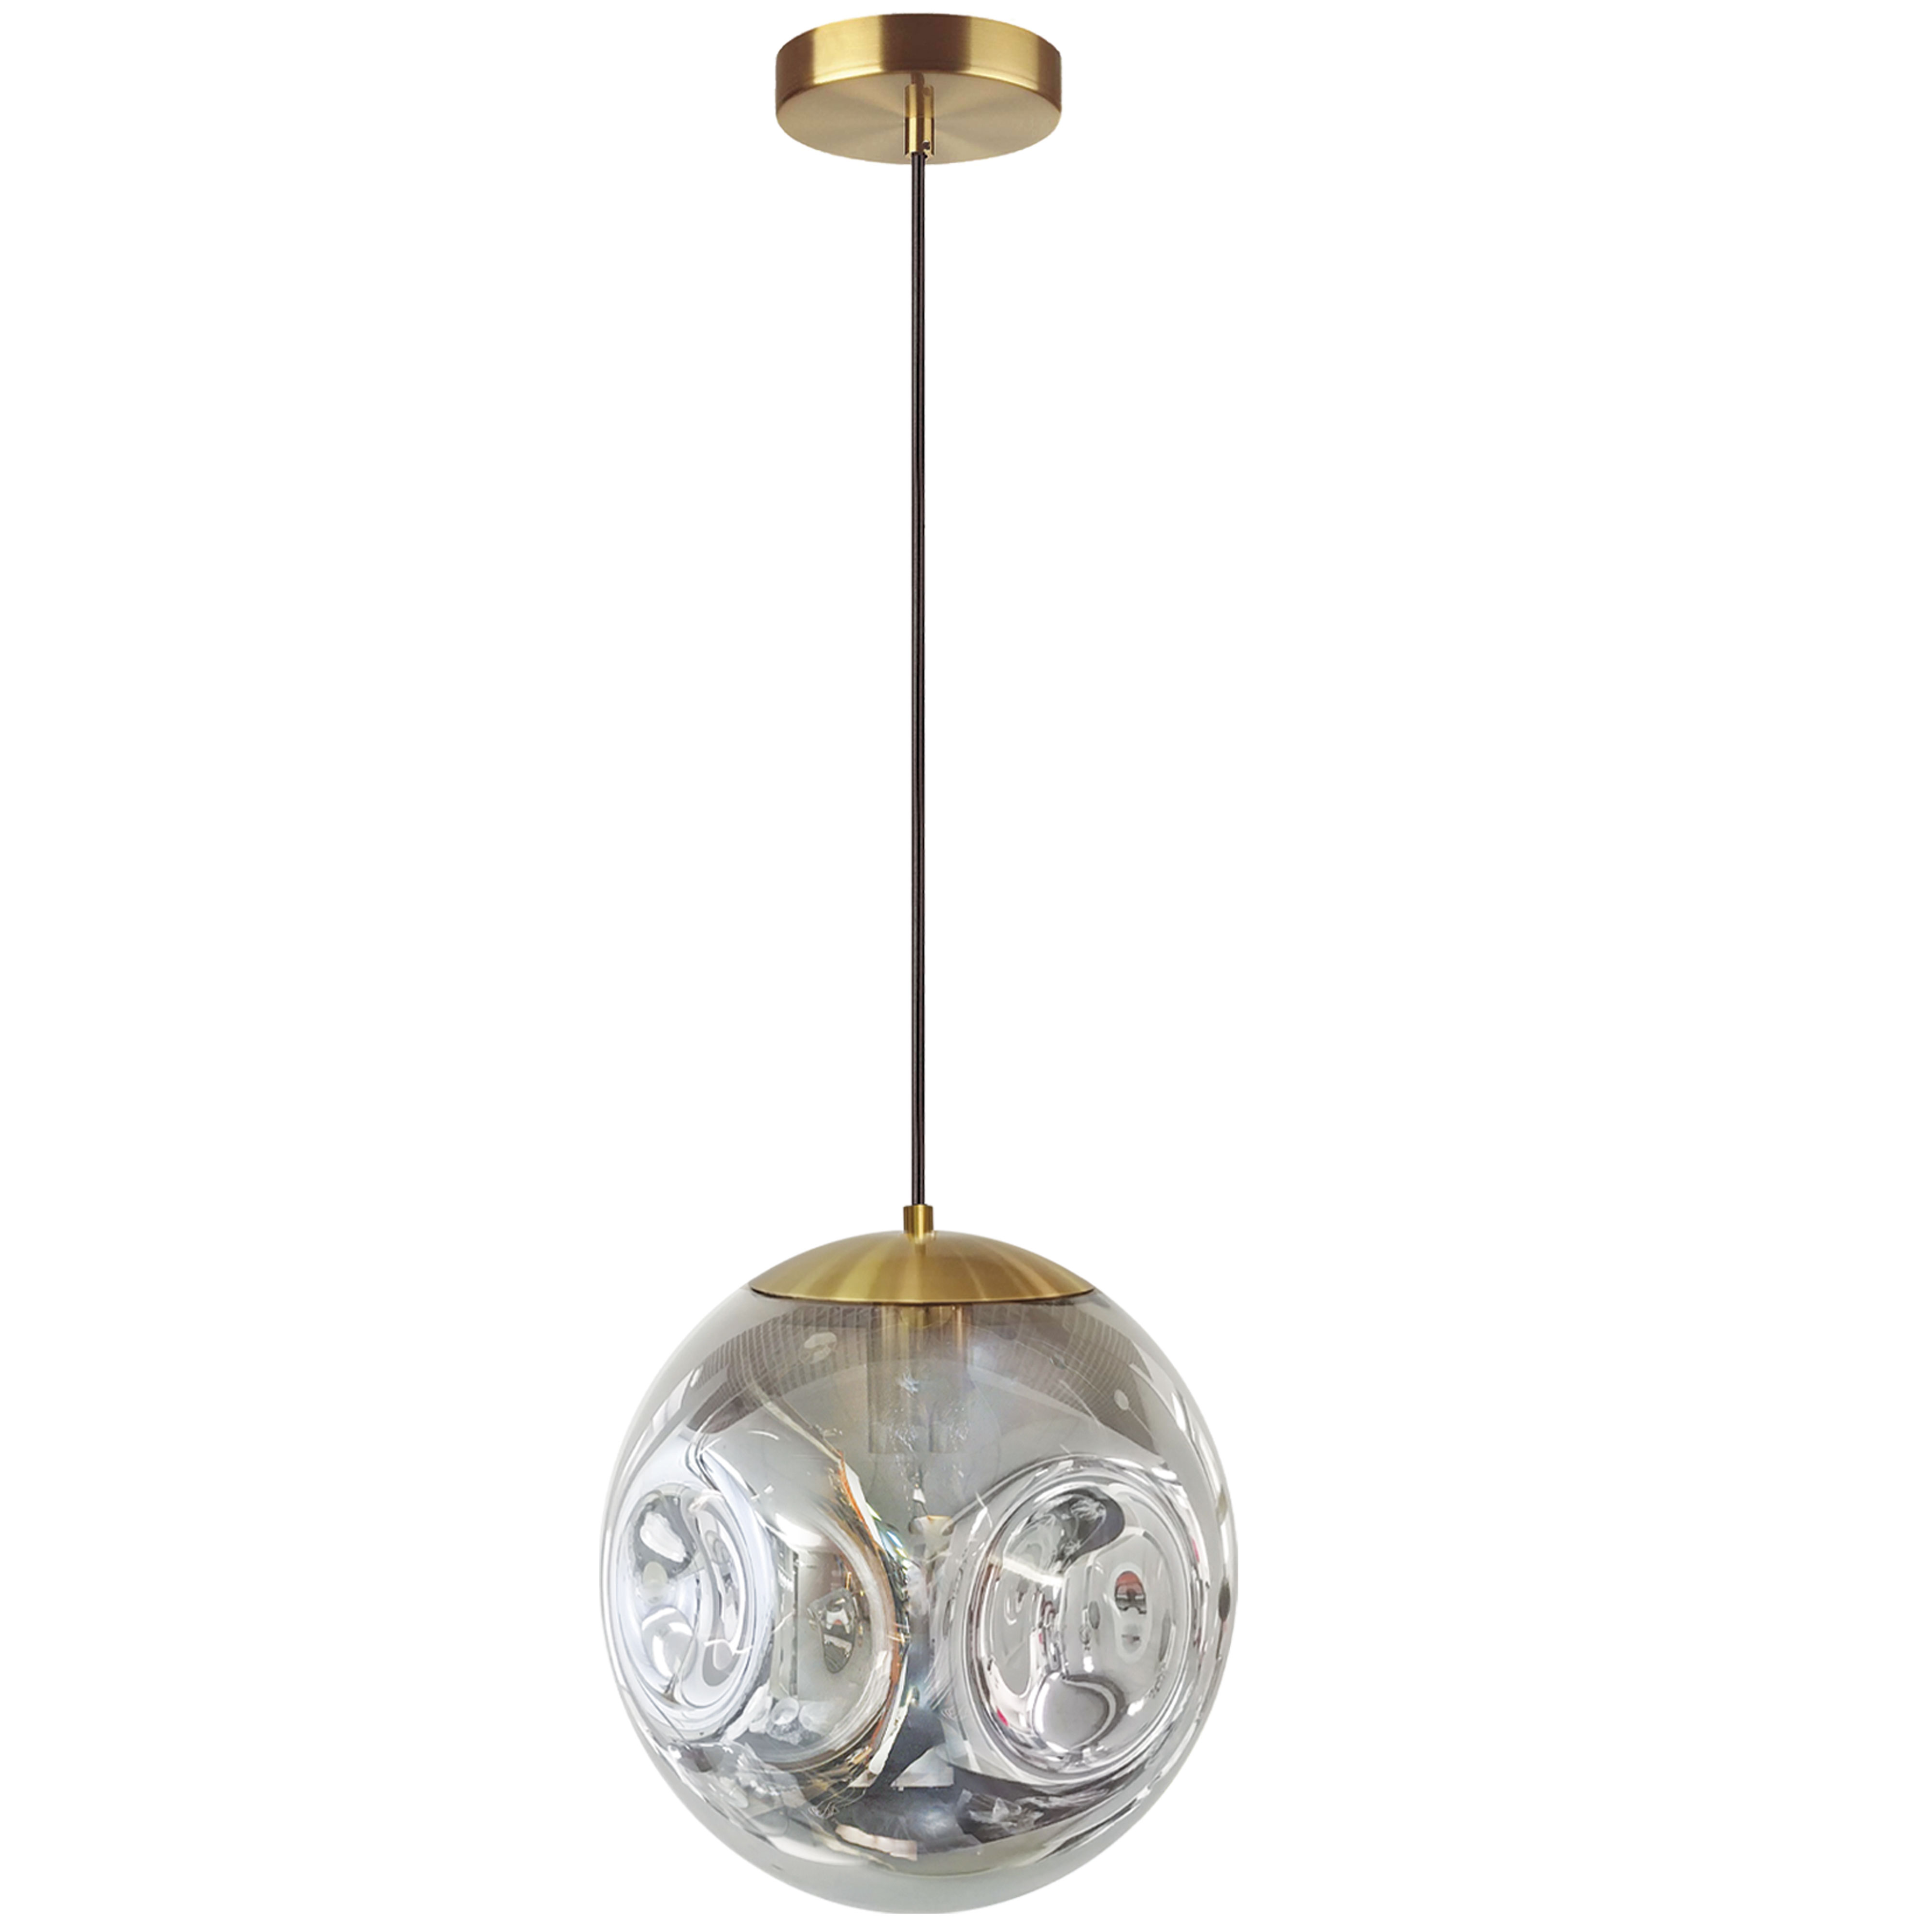 1 Light Incandescent Pendant, Aged Brass Finish with Smoked Glass